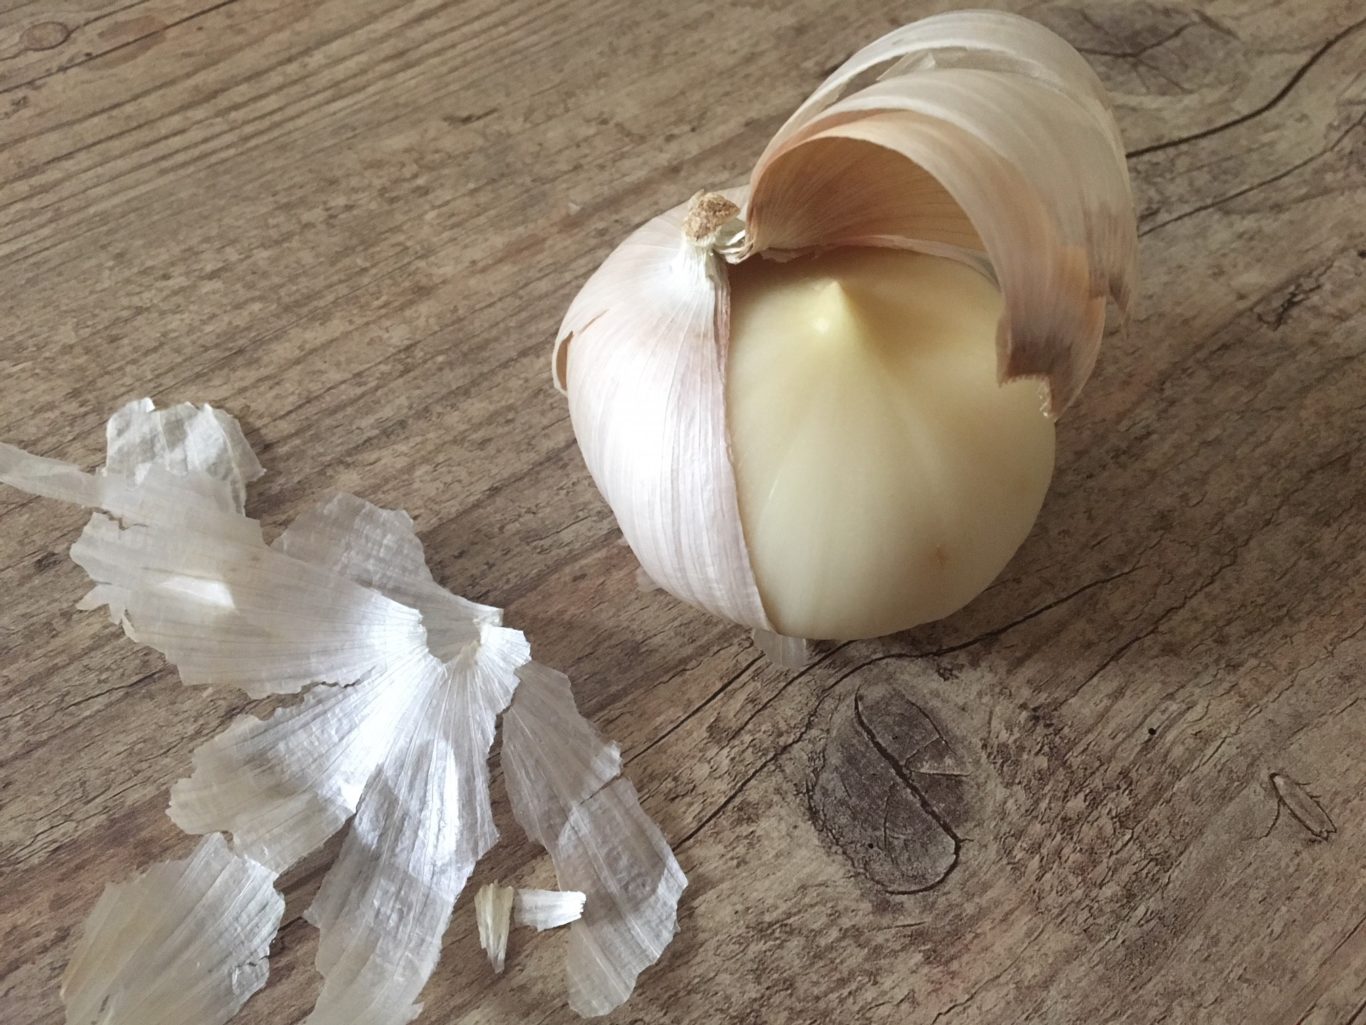 The Internet Is Fascinated By This Garlic Which Is Just One Solid Clove